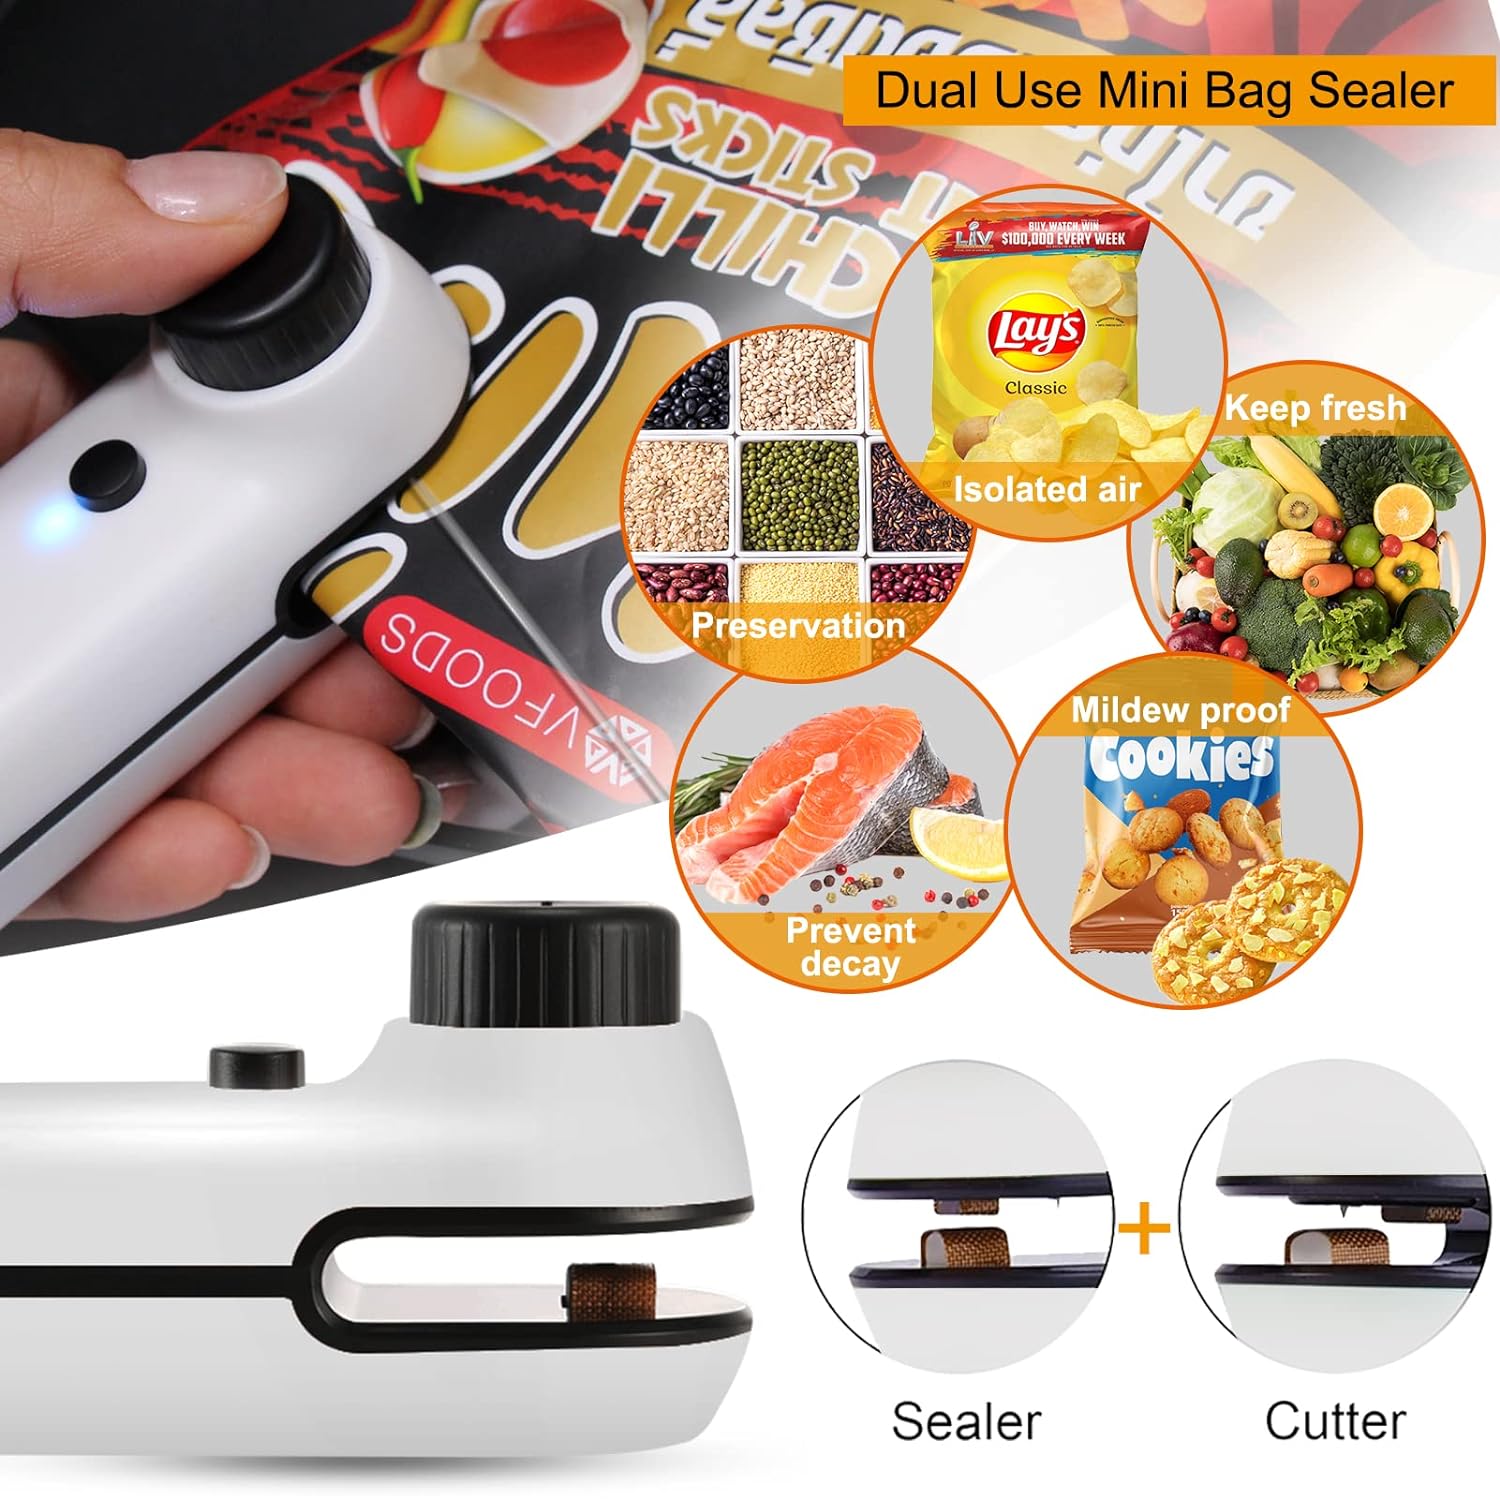 Mini Bag Sealer, 2 PACK HSLGOVE 2in1 Bag Sealer Heat Seal Rechargeable and Cutter, Mini Chip Bag Sealer Heat Seal with Soft Magnetic